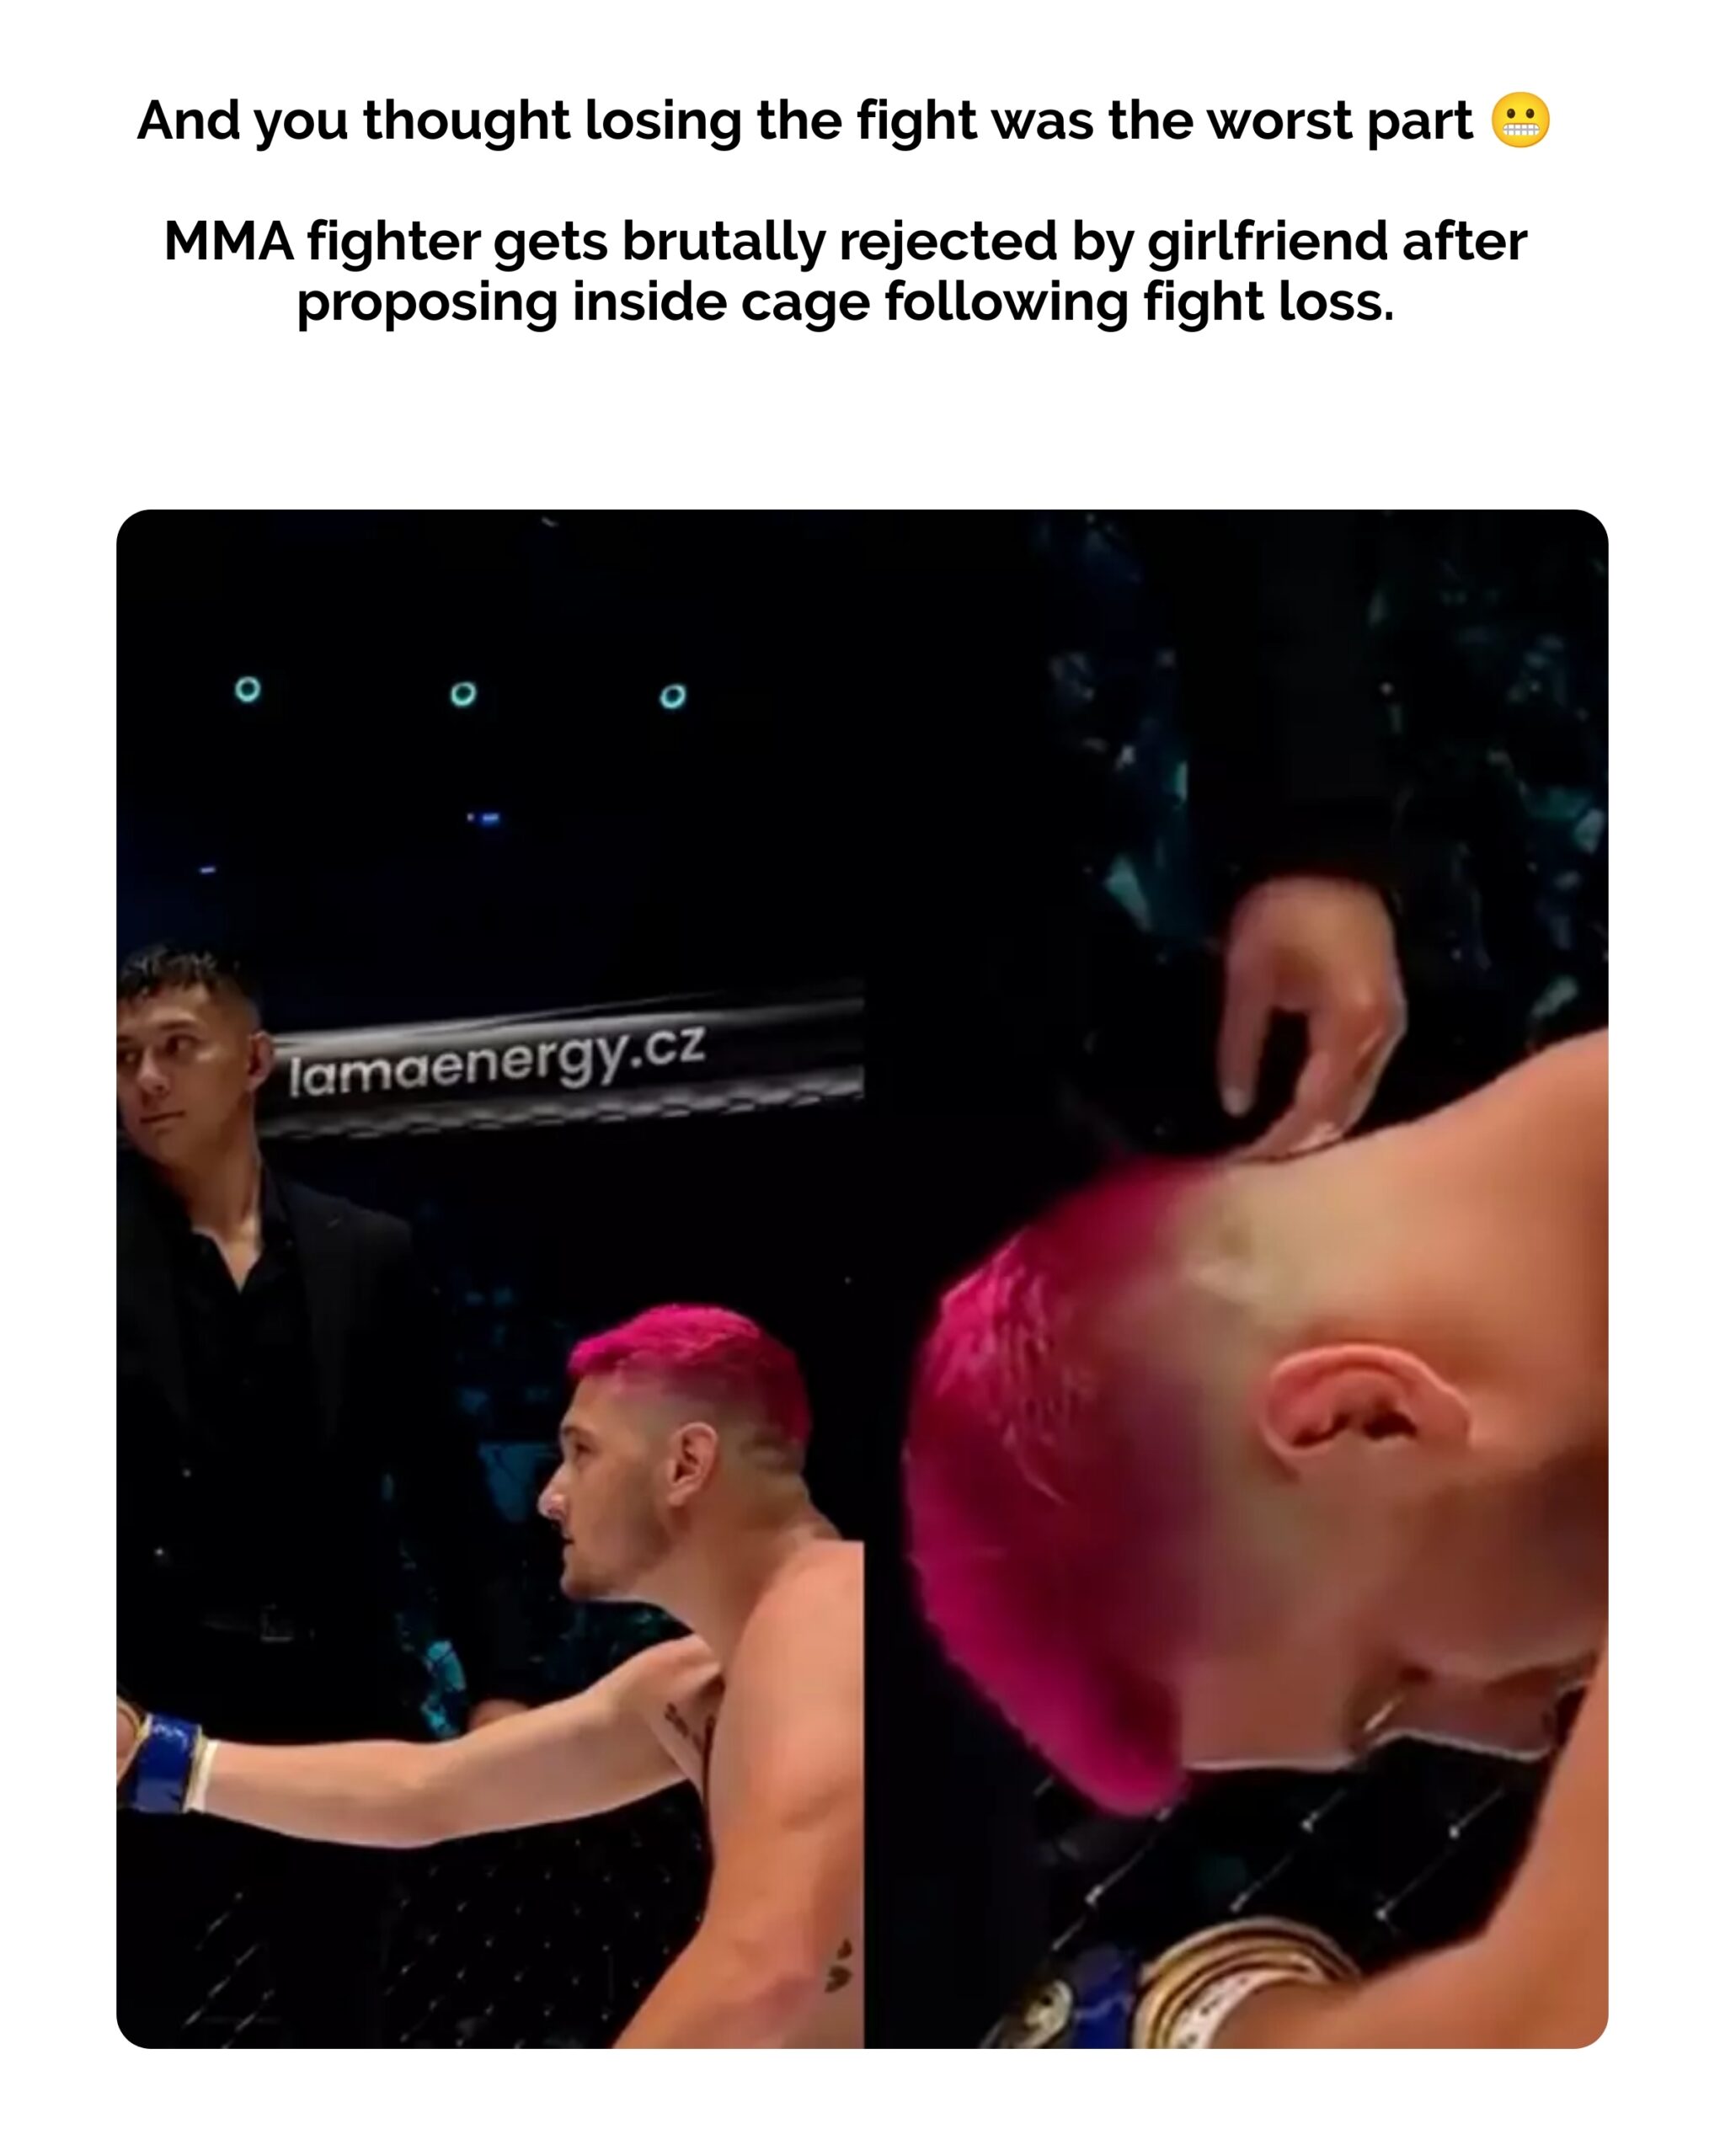 MMA Fighter Gets Brutally Rejected By Girlfriend After Proposing Inside Cage Following Fight Loss